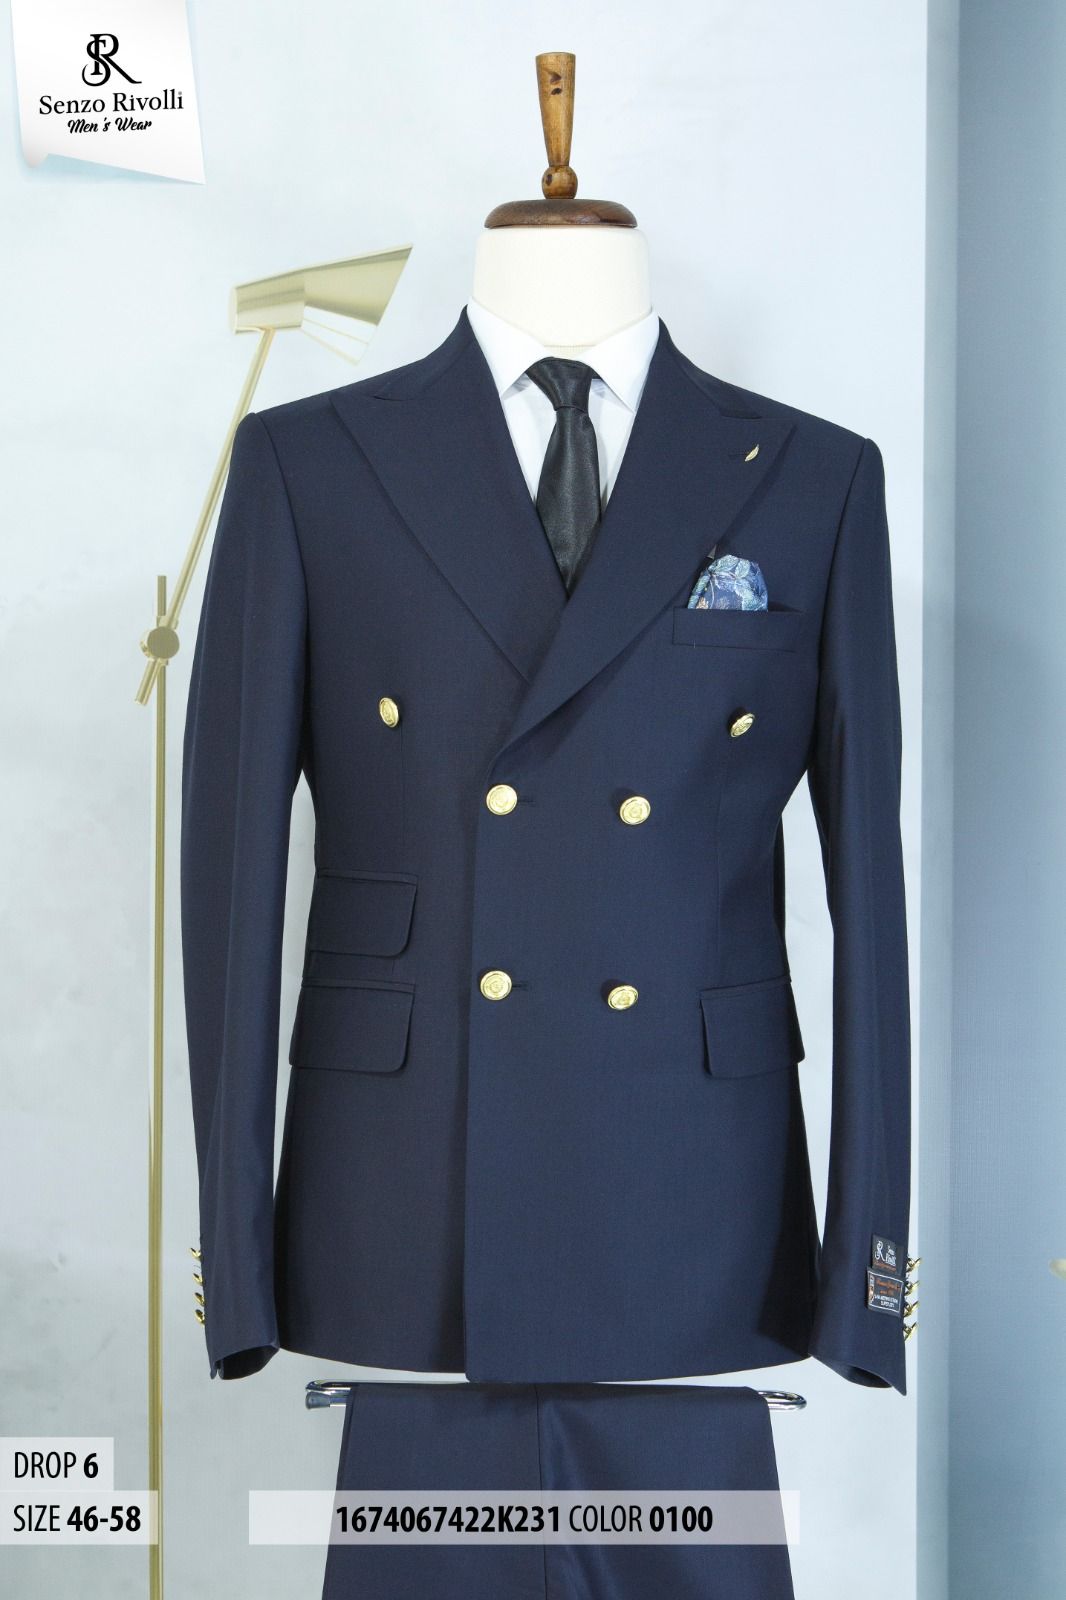 EXECUTIVE NAVY BLUE BREASTED TURKEY SUIT WITH GOLDEN BUTTON